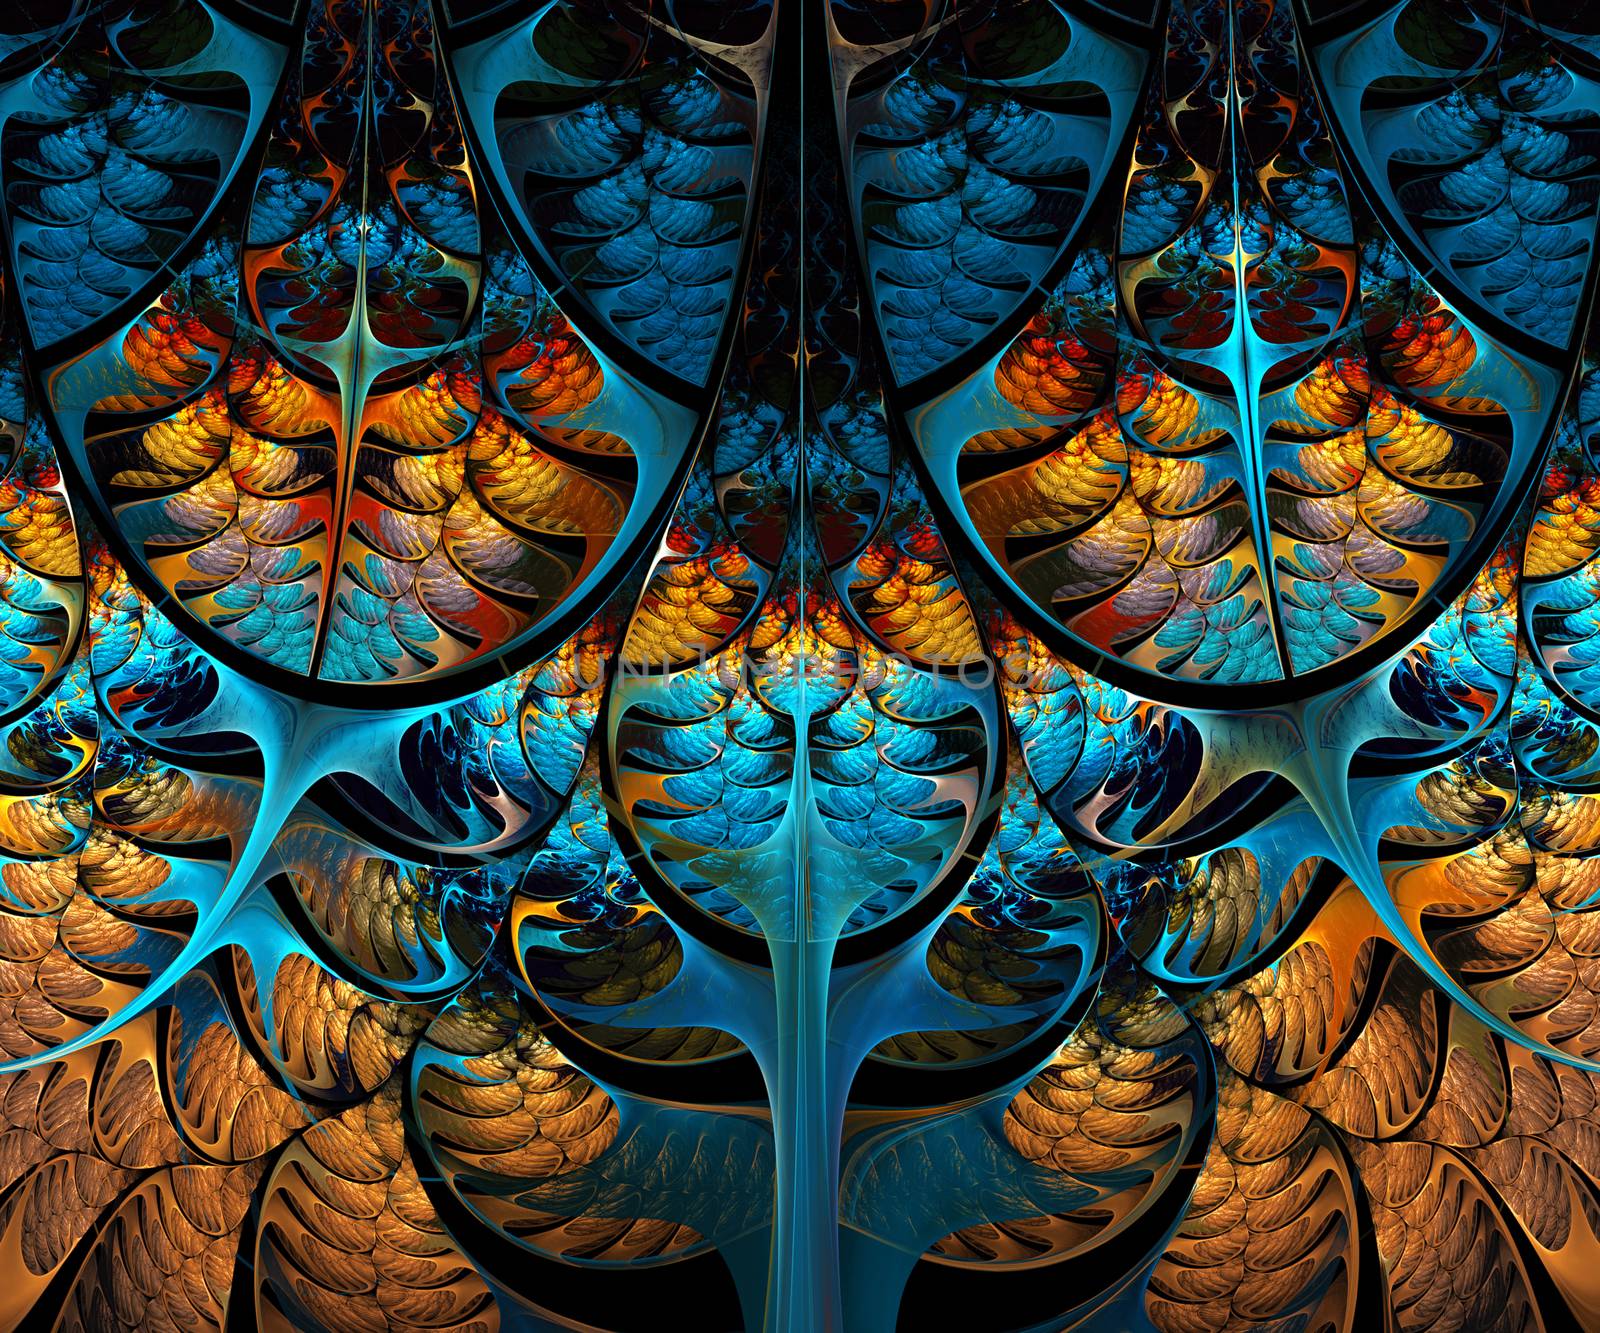 Computer generated fractal artwork for creative design, art and entertainment